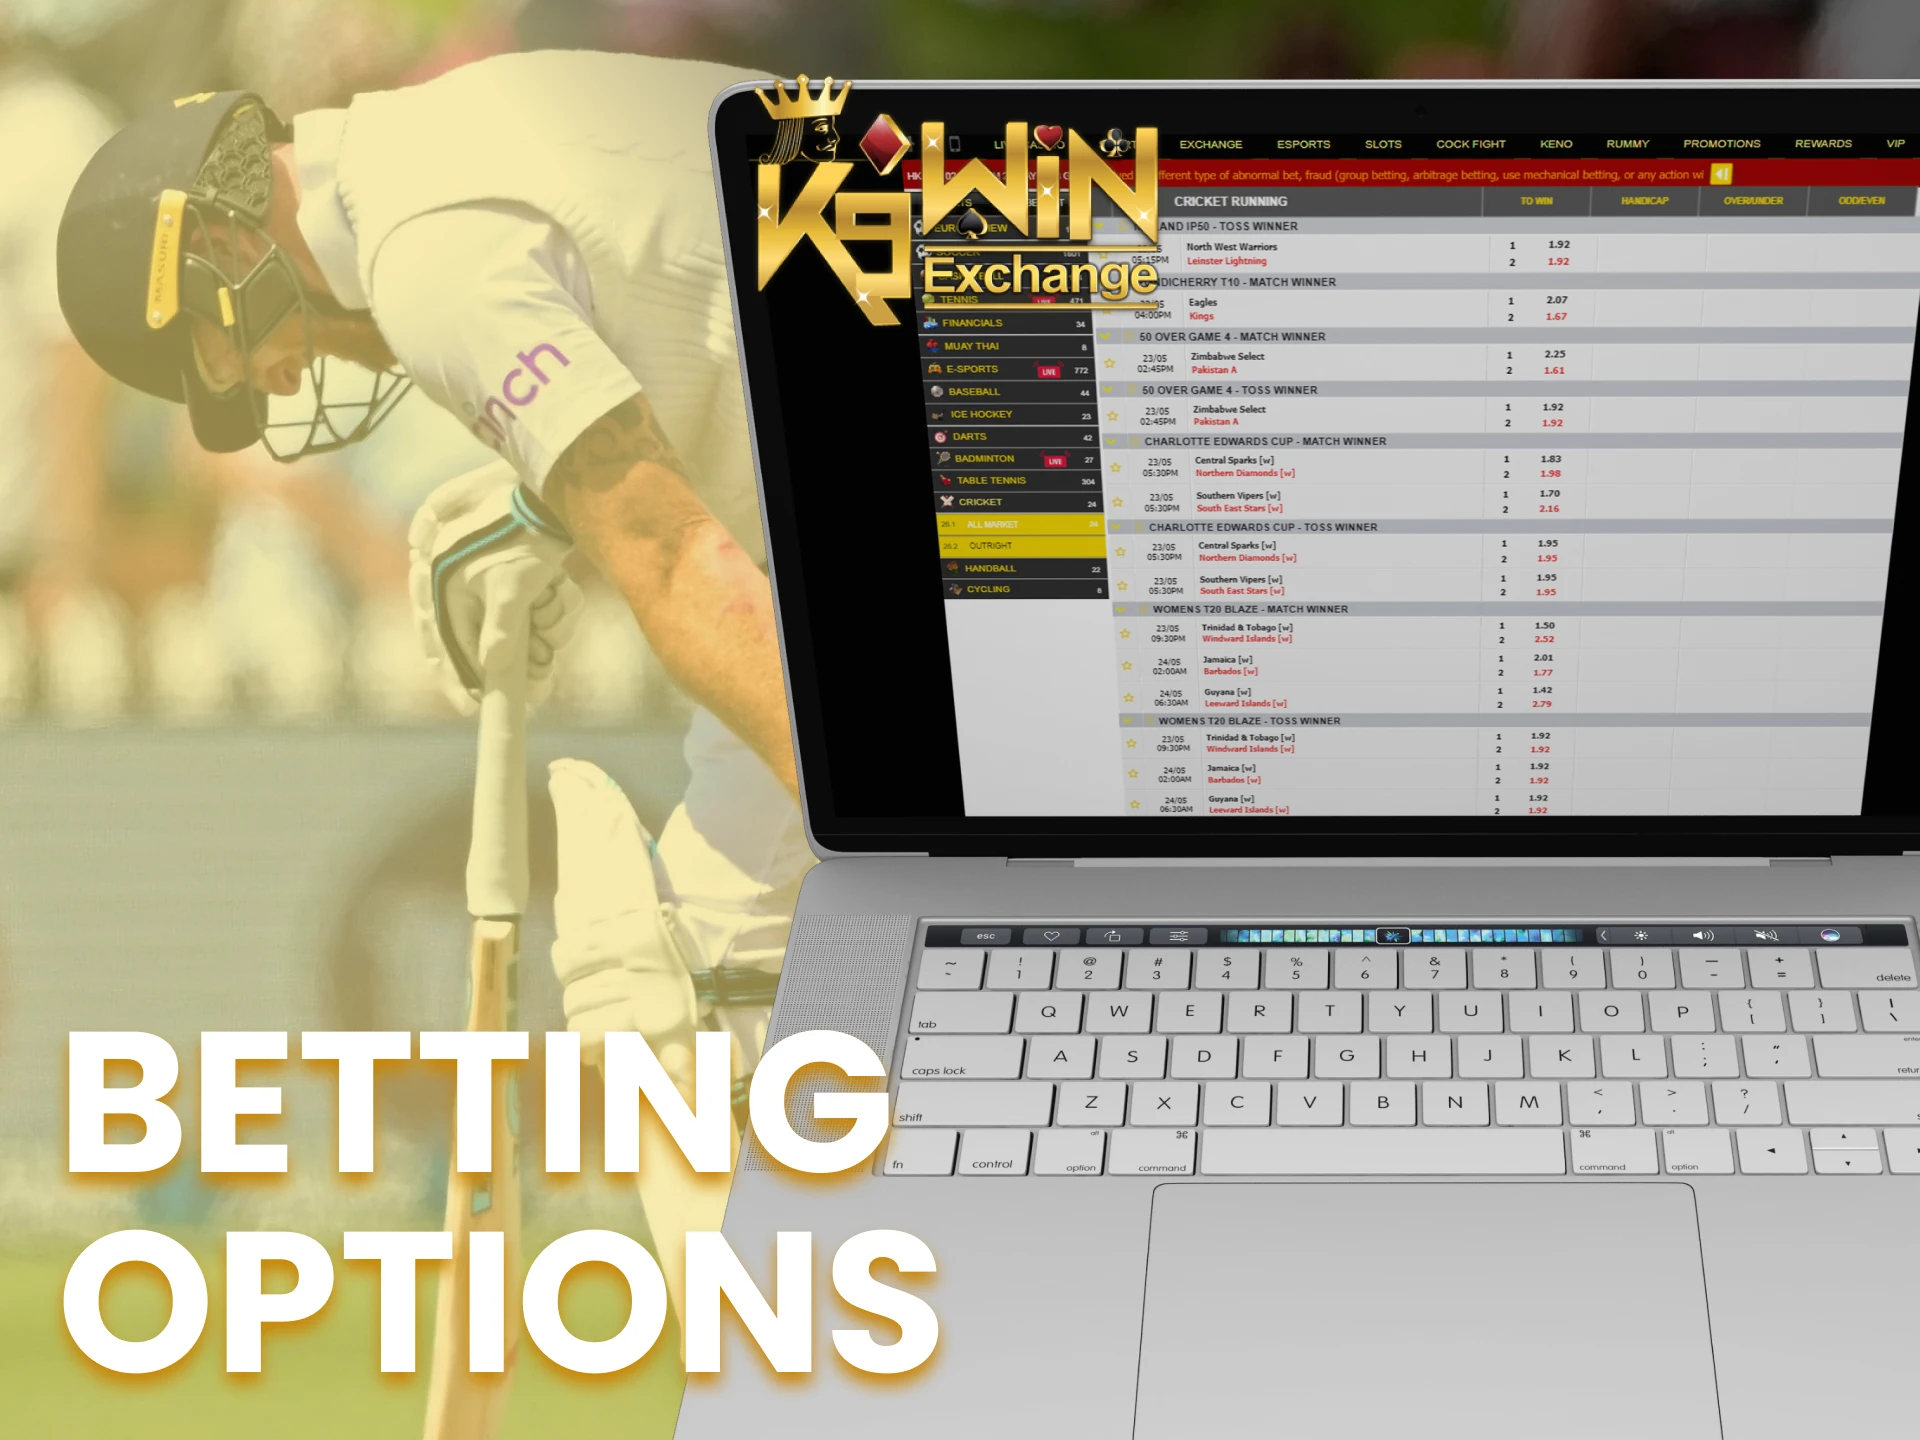 Use different betting options while making a bet on the K9Win sports page.